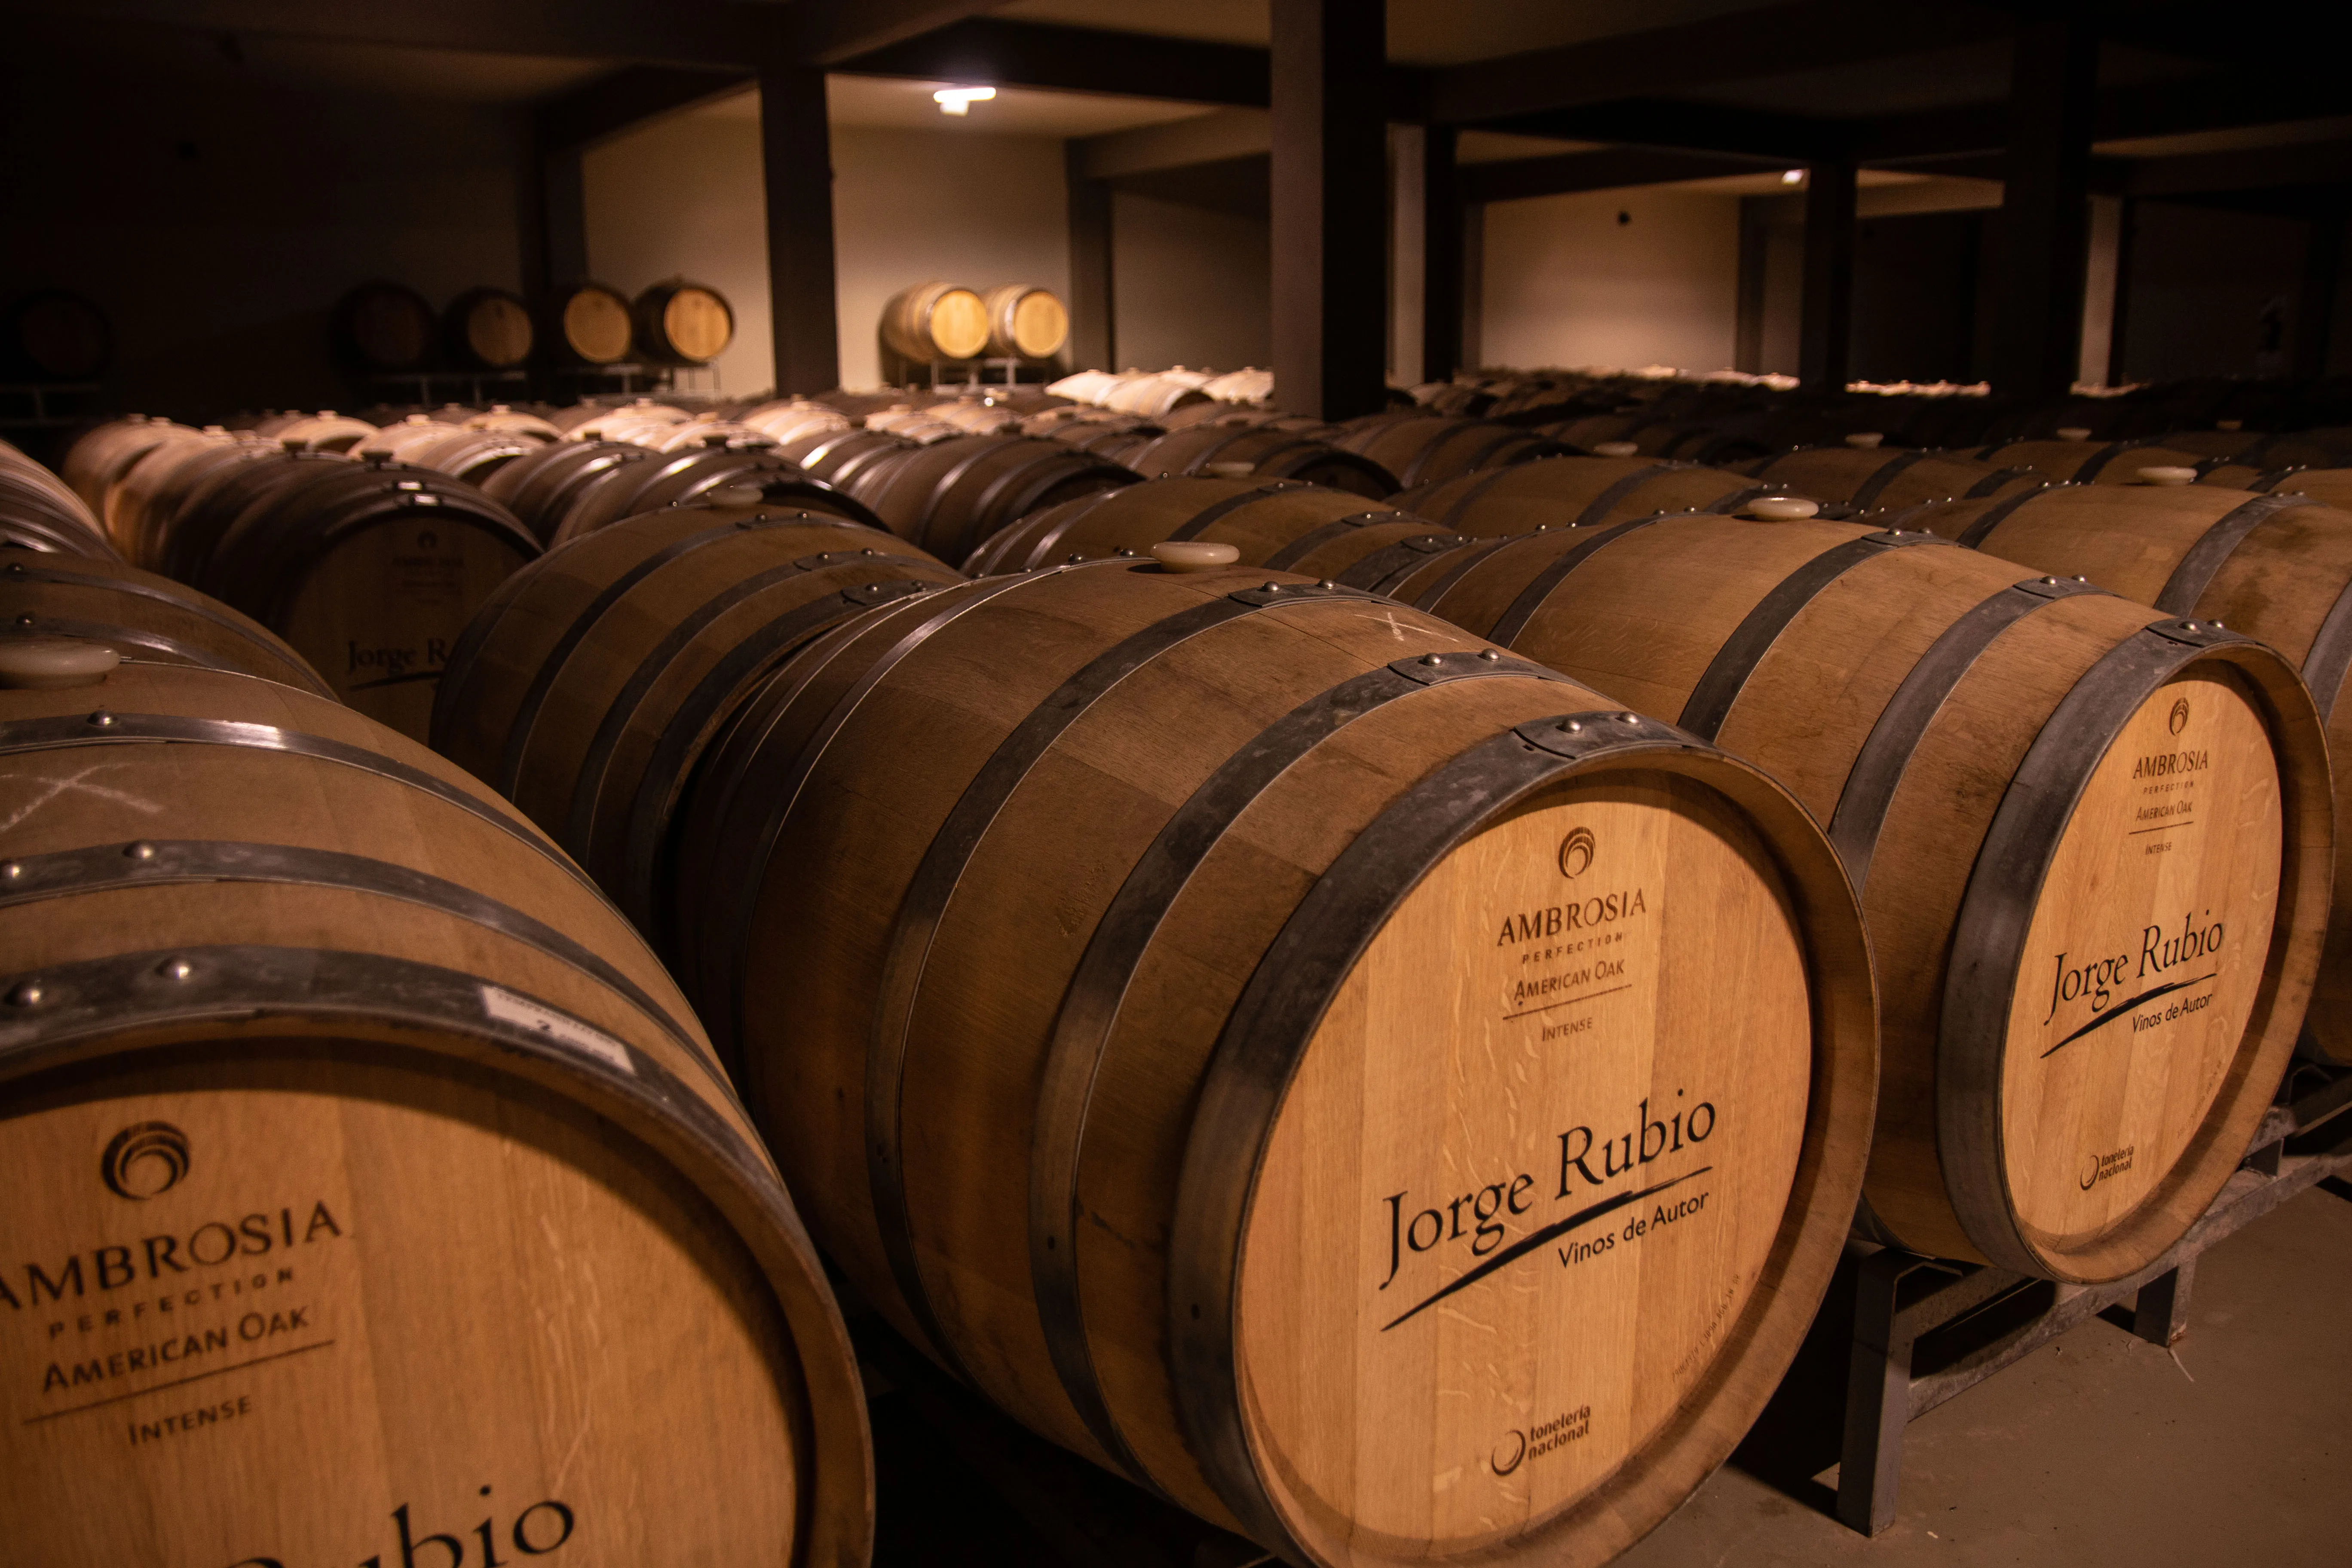 Bodega Jorge Rubio in Argentina, South America | Wineries - Rated 3.8